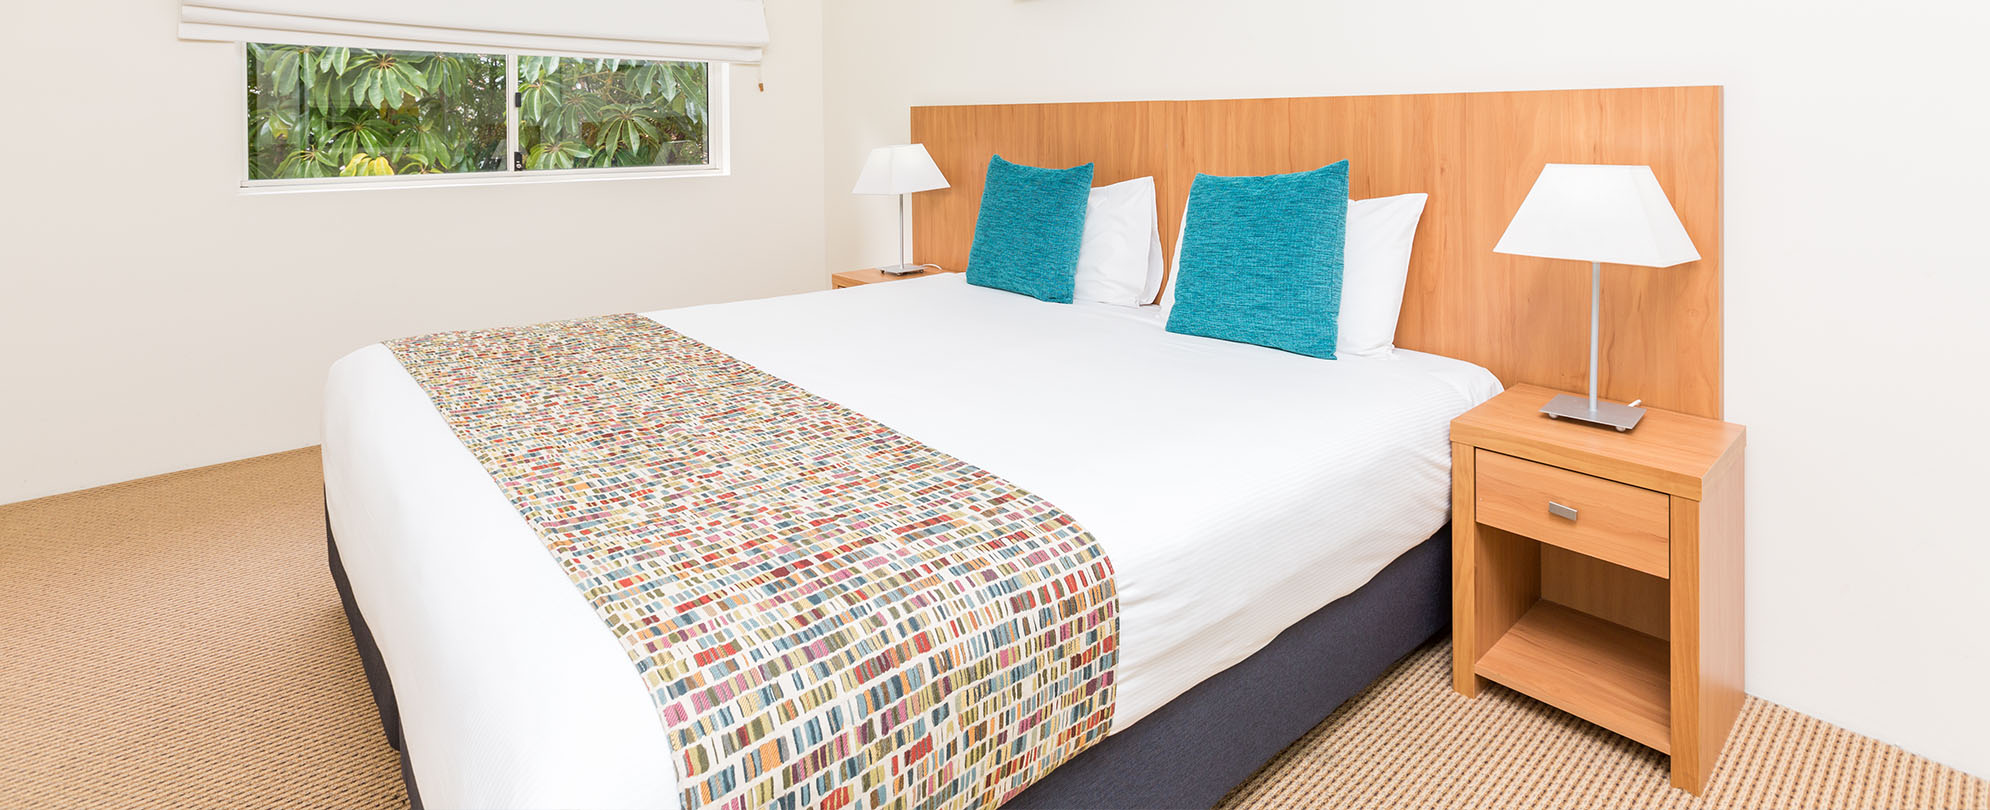 A  king-sized bed in a studio suite at Club Wyndham Shoal Bay.